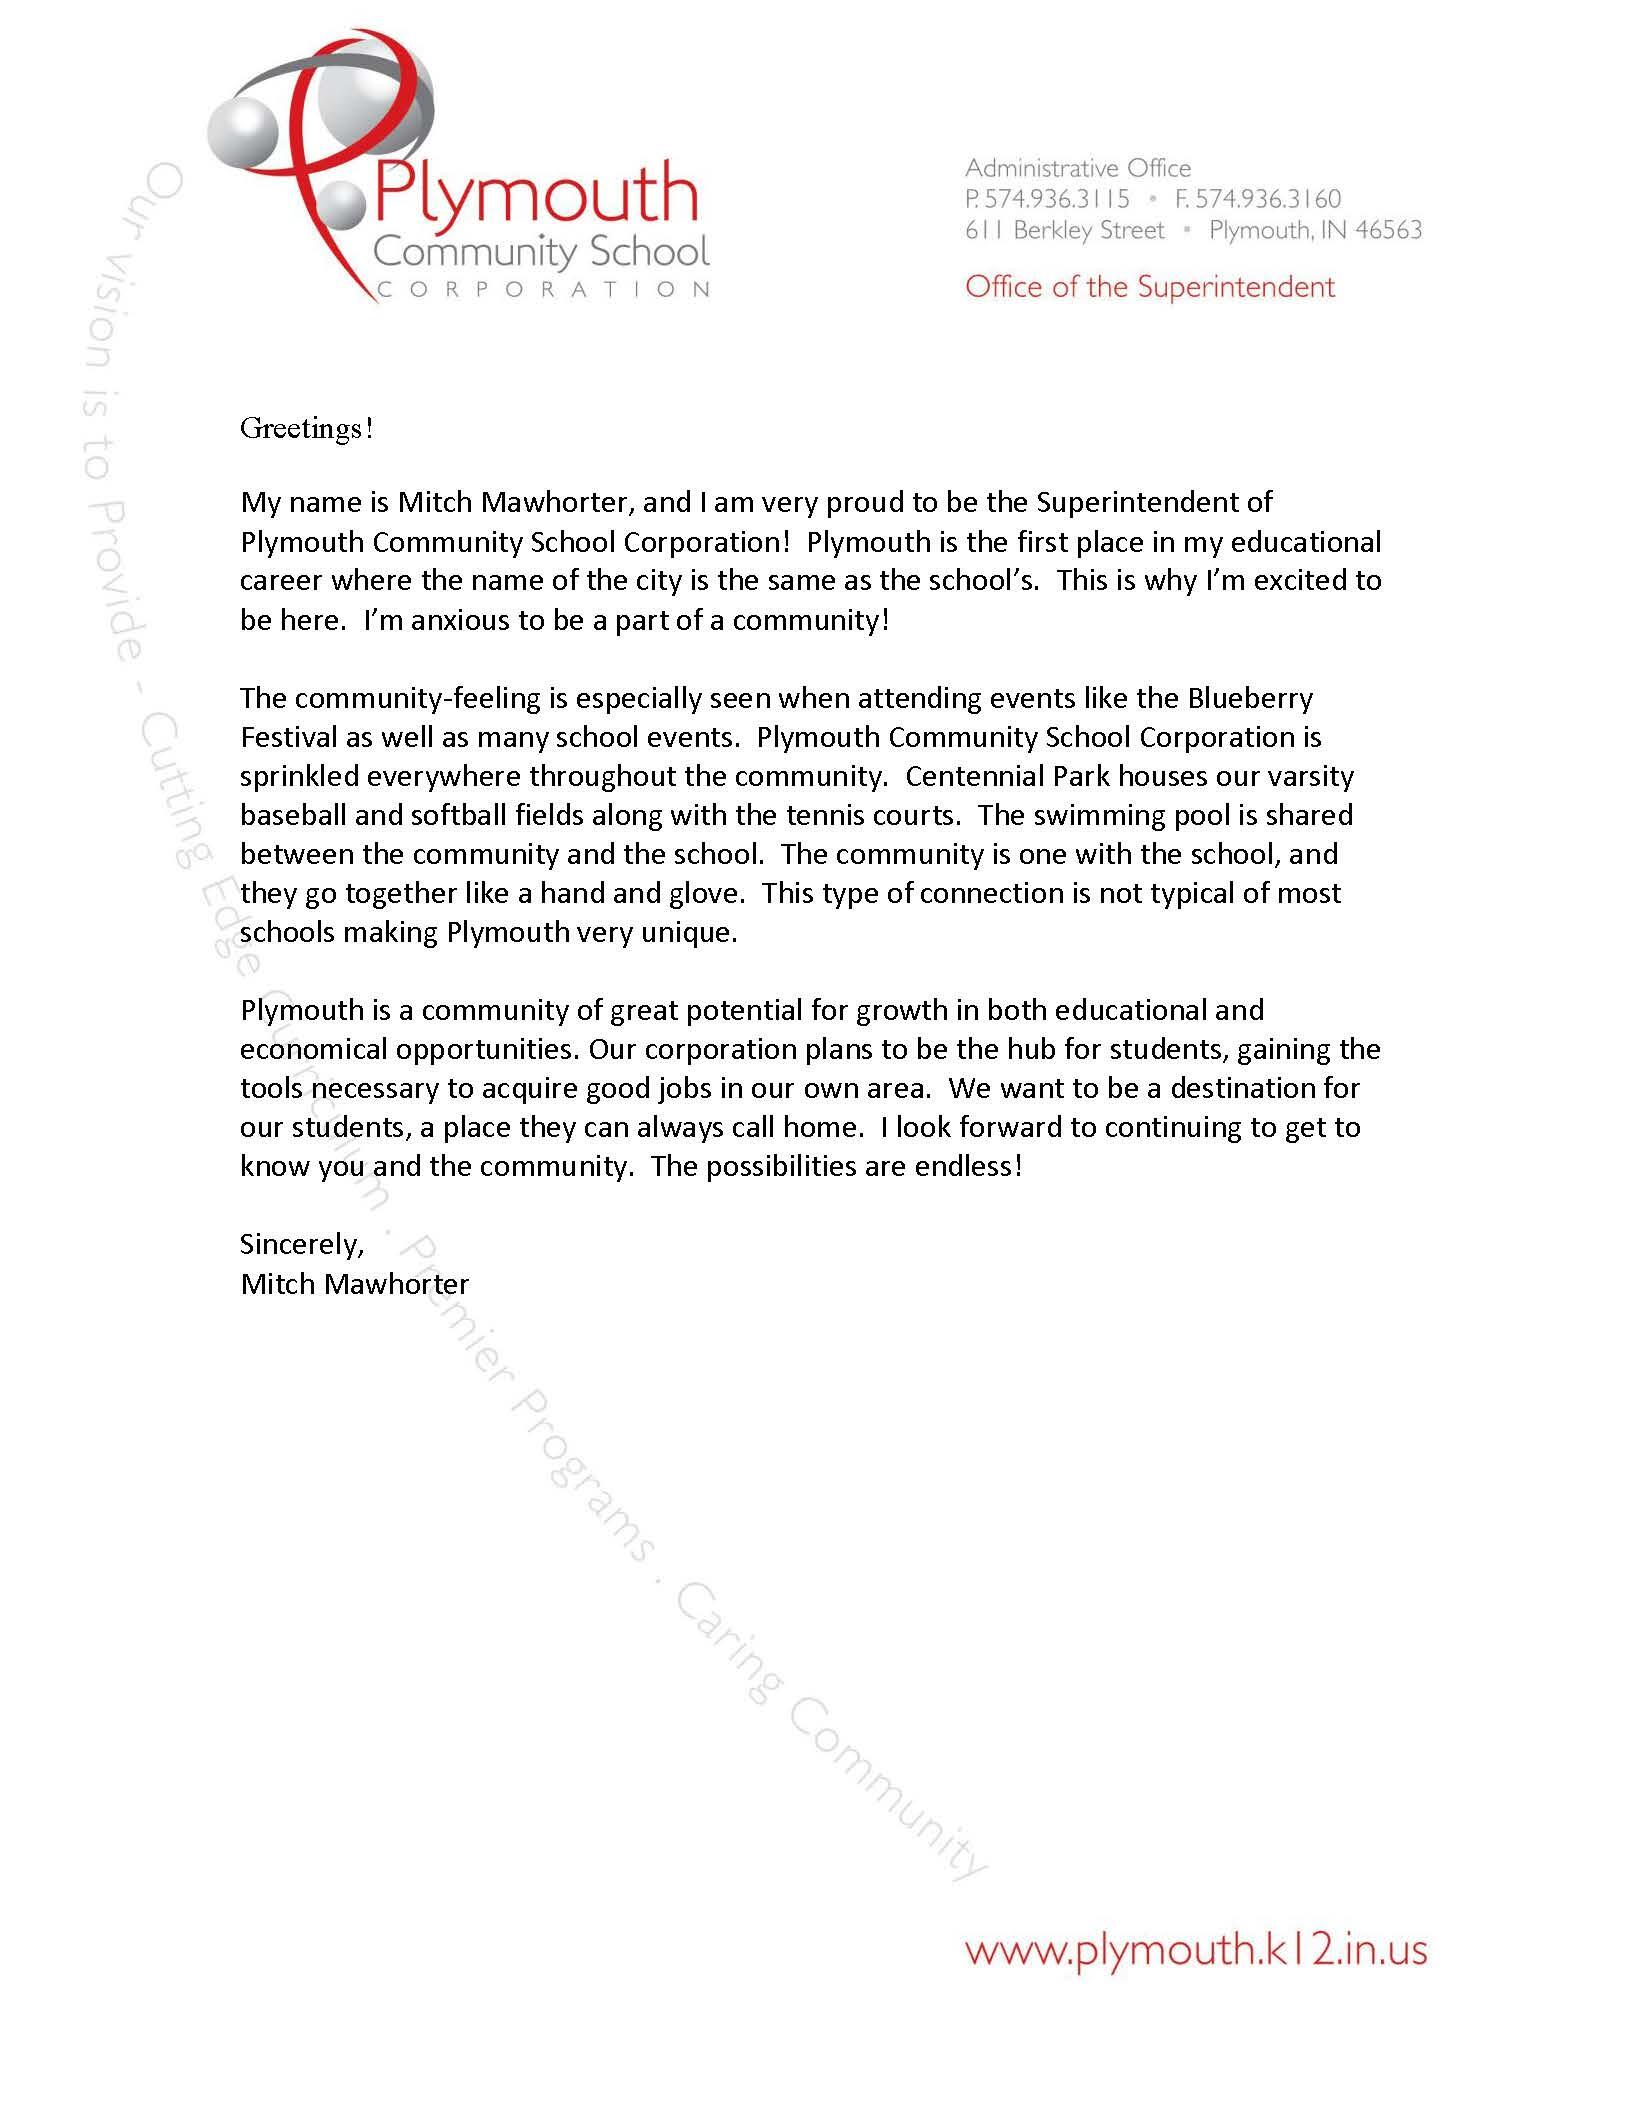 PCSC Letterhead with  My name is Mitch Mawhorter, and I am very proud to be the Superintendent of Plymouth Community School Corporation!  Plymouth is the first place in my educational career where the name of the city is the same as the school’s.  This is why I’m excited to be here.  I’m anxious to be a part of a community!   The community-feeling is especially seen when attending events like the Blueberry Festival as well as many school events.  Plymouth Community School Corporation is sprinkled everywhere throughout the community.  Centennial Park houses our varsity baseball and softball fields along with the tennis courts.  The swimming pool is shared between the community and the school.  The community is one with the school, and they go together like a hand and glove.  This type of connection is not typical of most schools making Plymouth very unique.  Plymouth is a community of great potential for growth in both educational and economical opportunities. Our corporation plans to be the hub for students, gaining the tools necessary to acquire good jobs in our own area.  We want to be a destination for our students, a place they can always call home.  I look forward to continuing to get to know you and the community.  The possibilities are endless!  Sincerely,  Mitch Mawhorter